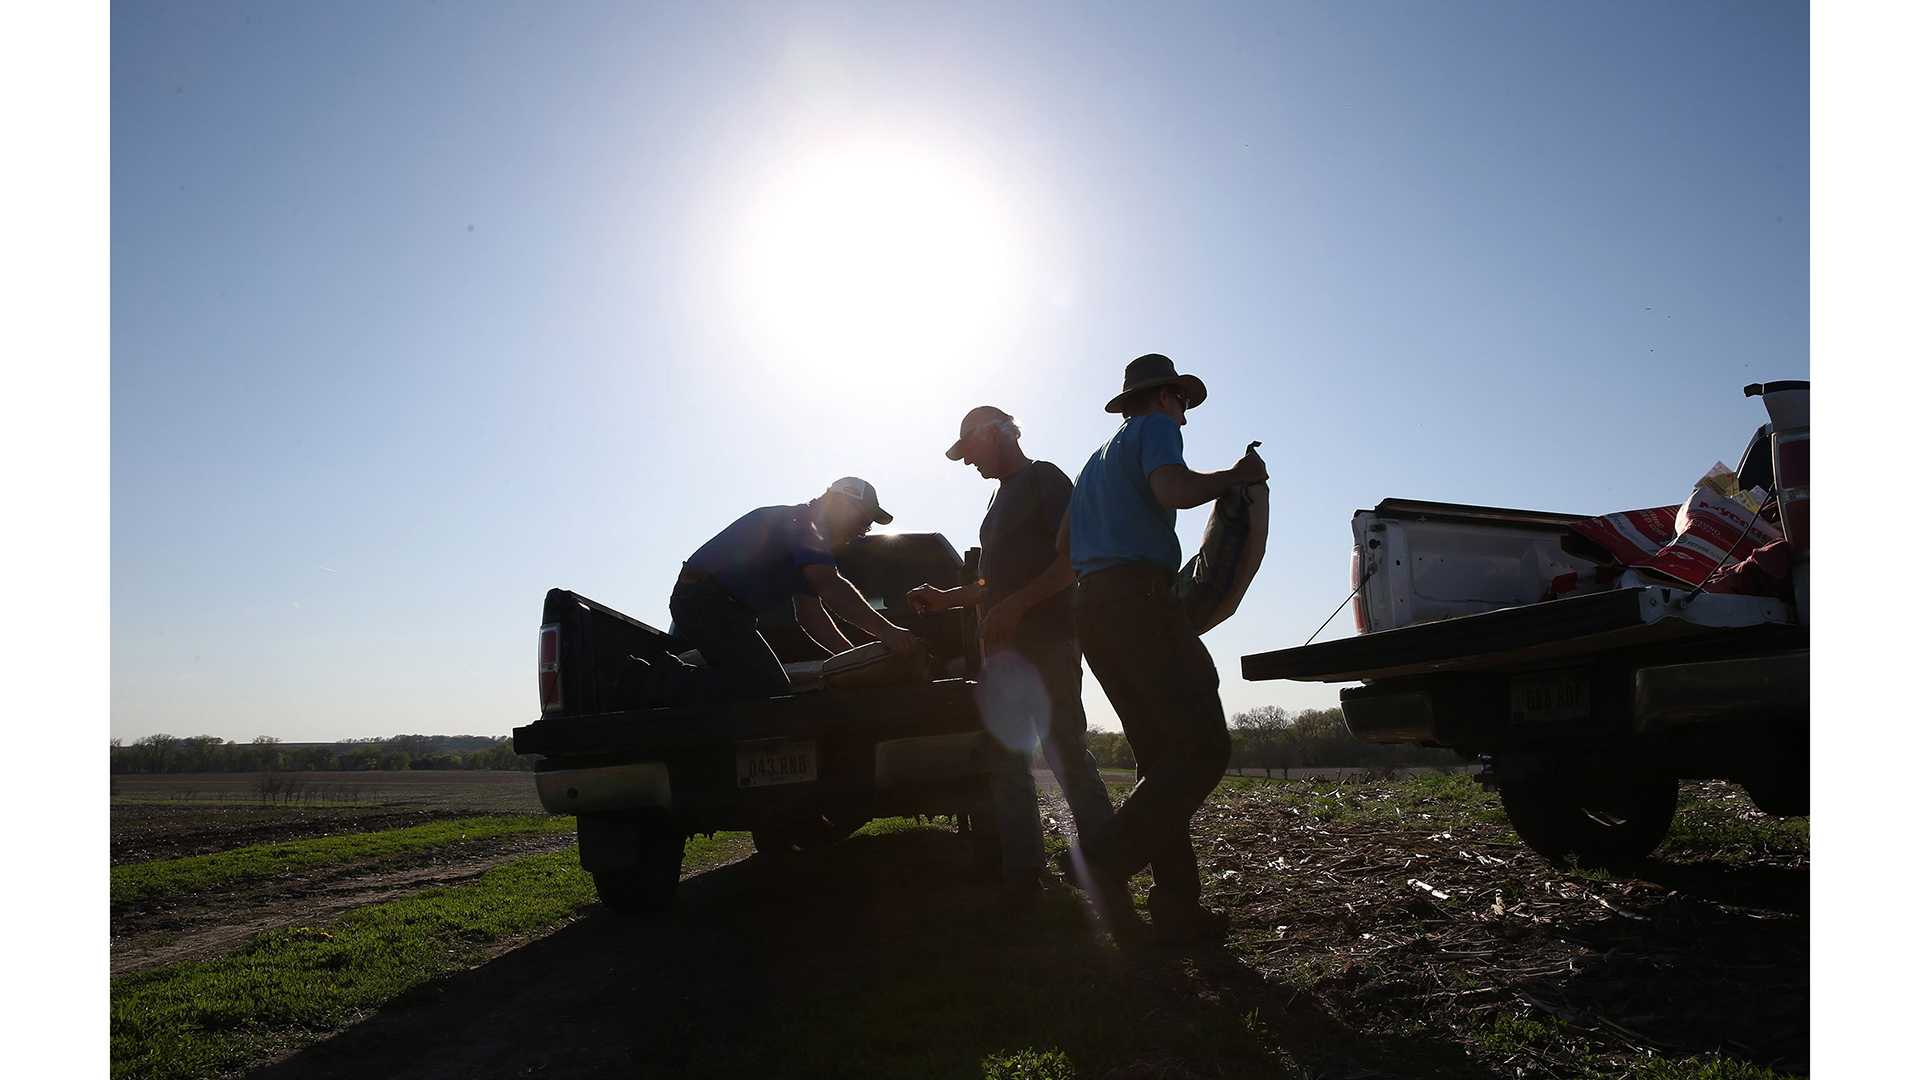 Jon Bakehouse, right, and his father Bach Bakehouse, center, pick up a few bags of a new type of soybean during planting season on April 29,  2015 in Hastings, Iowa. (Abel Uribe/Chicago Tribune/TNS)